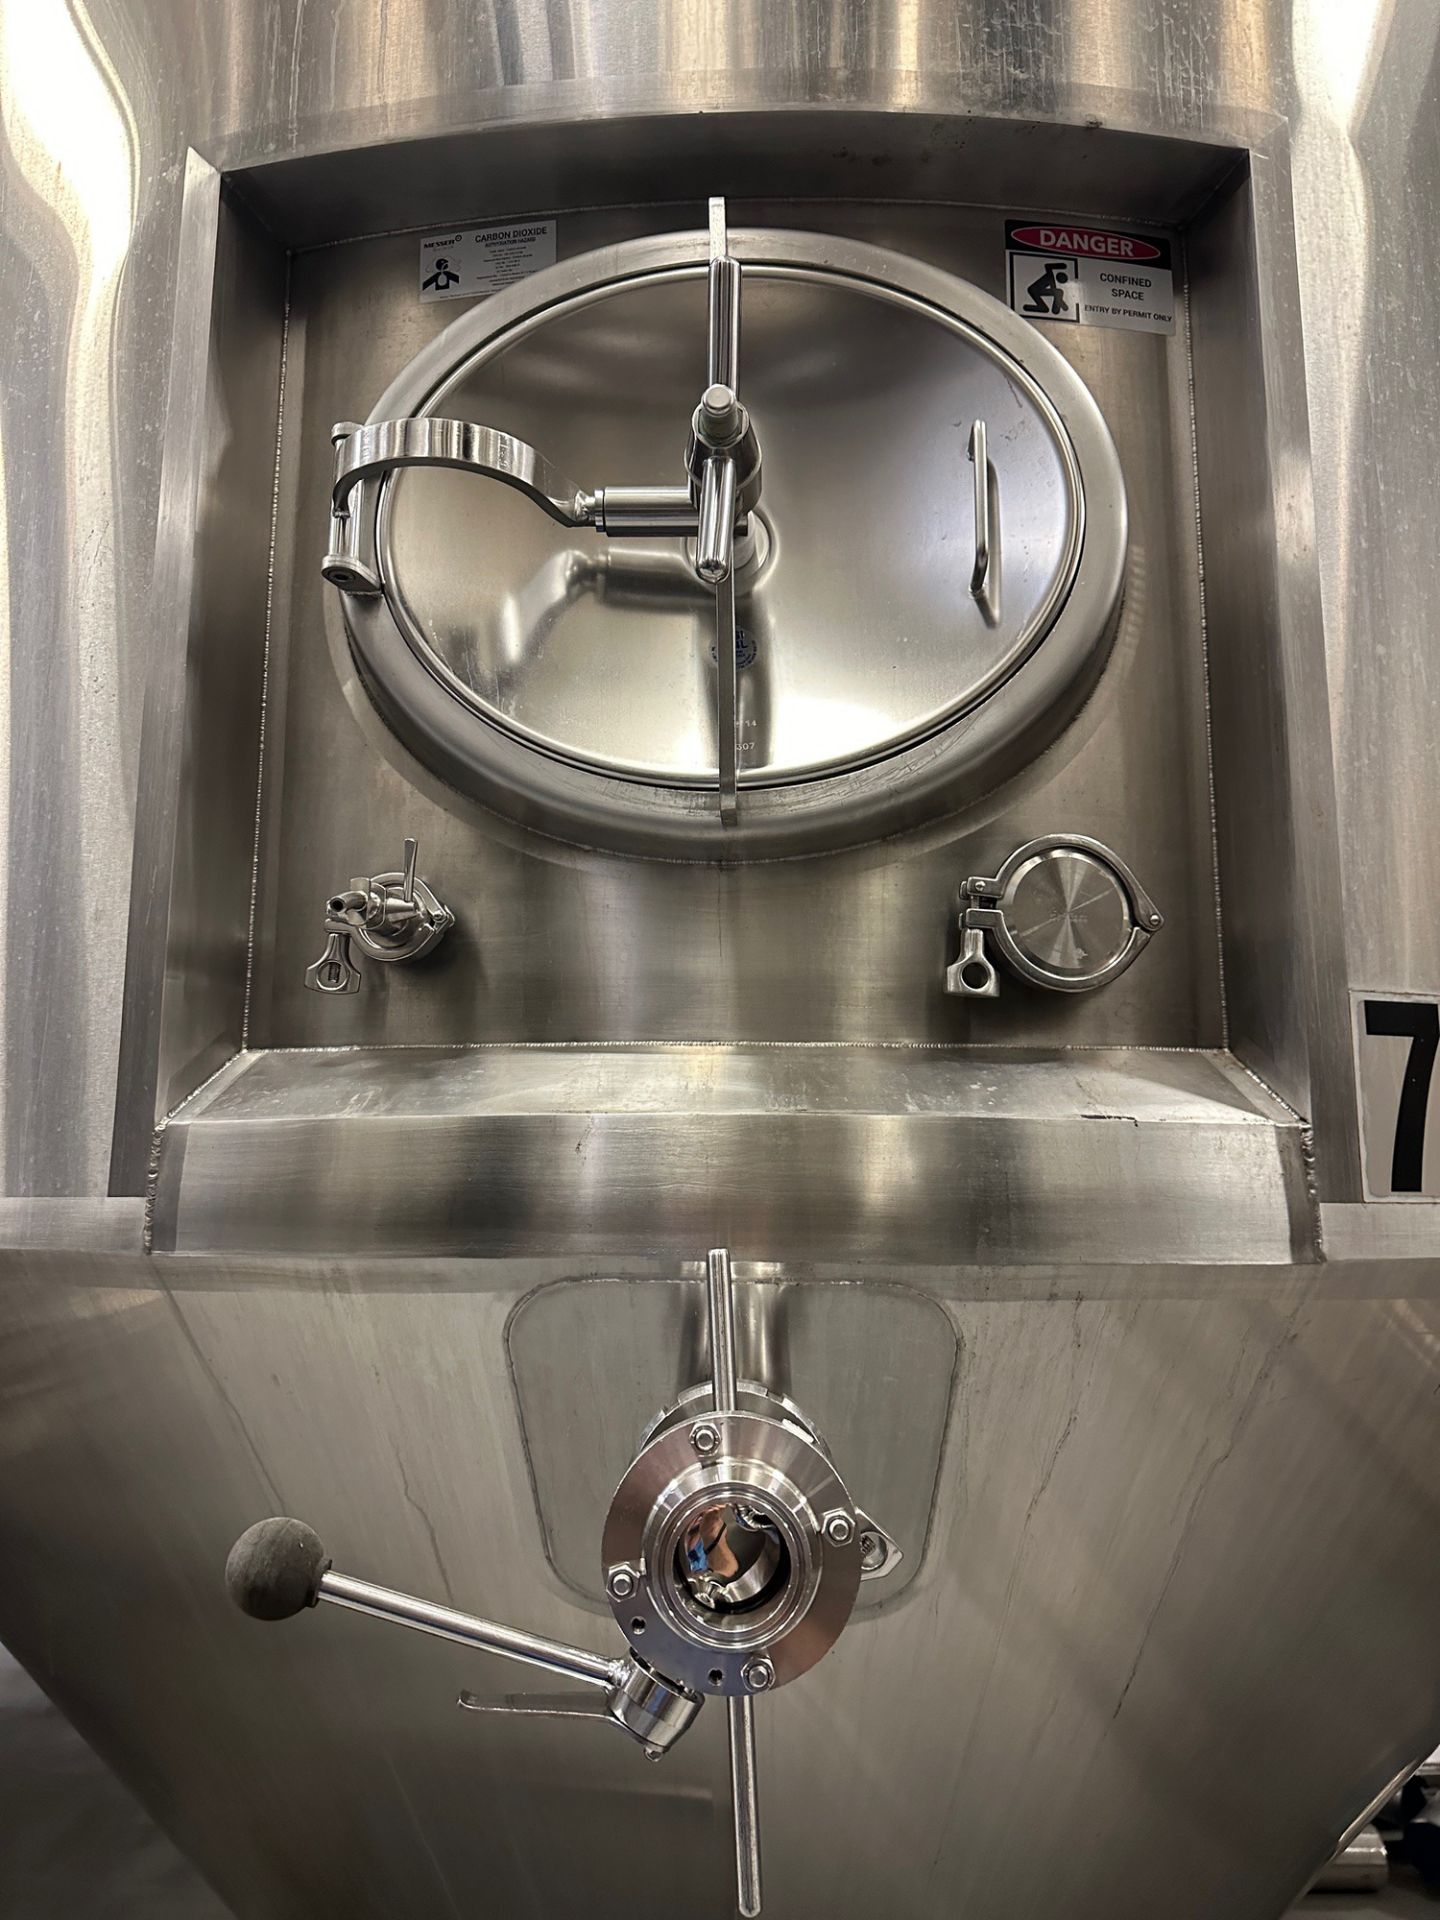 (1 of 6) 2016 NSI 132 BBL FV / 175 BBL or 5,400 Gal Max Capacity Stainless Steel Uni-Tank (7), Cone - Image 2 of 4